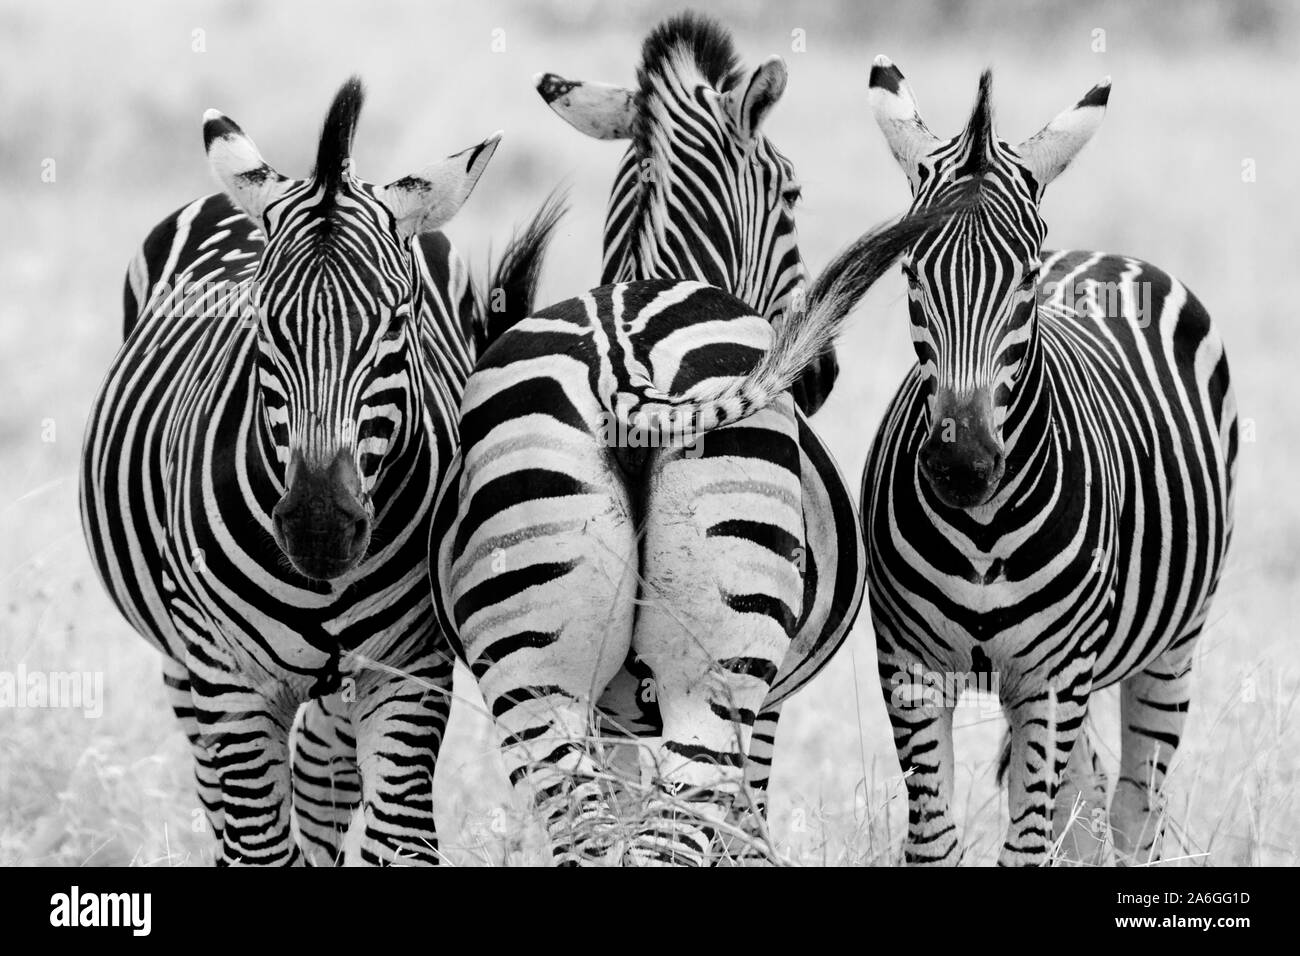 Three zebra check out the surroundings as a group in Kruger National Park, South Africa Stock Photo